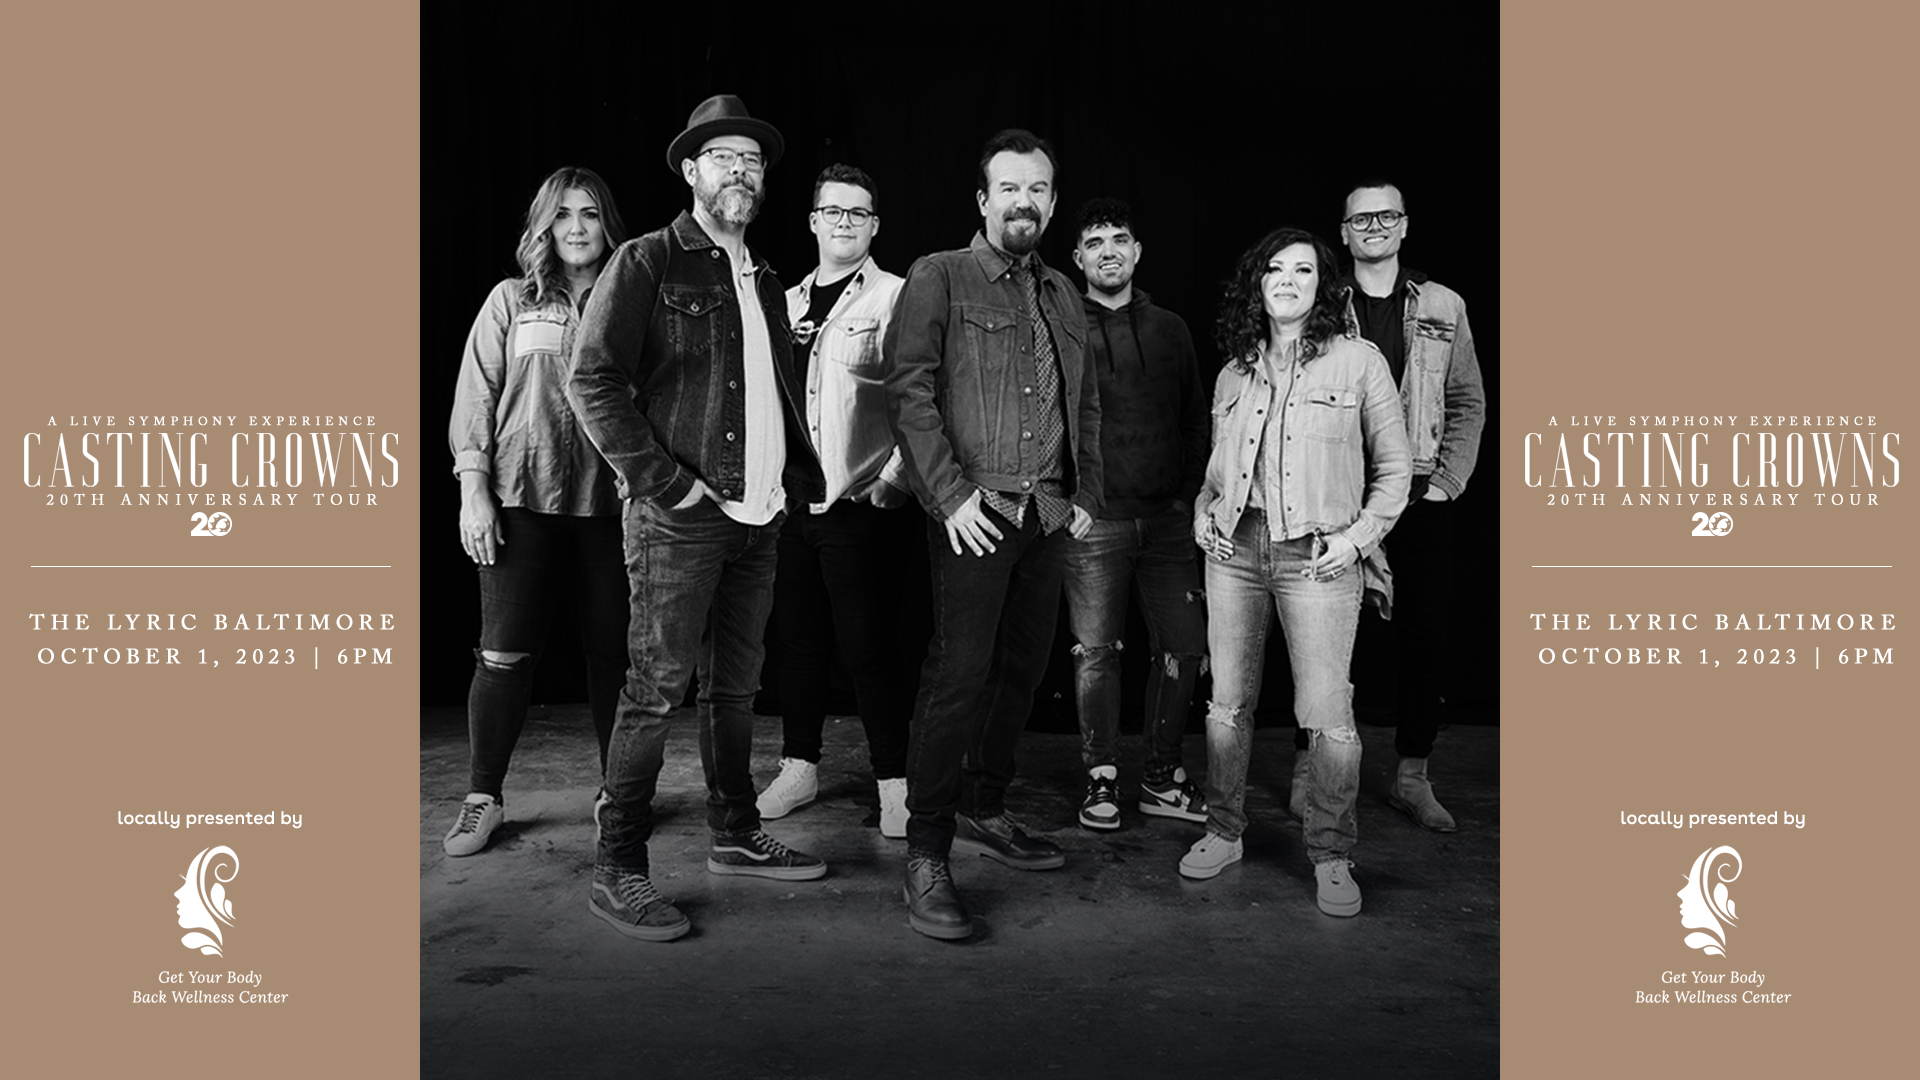 Black and white photo of the seven members of Casting Crowns standing side by side as they smile in front of a black backdrop